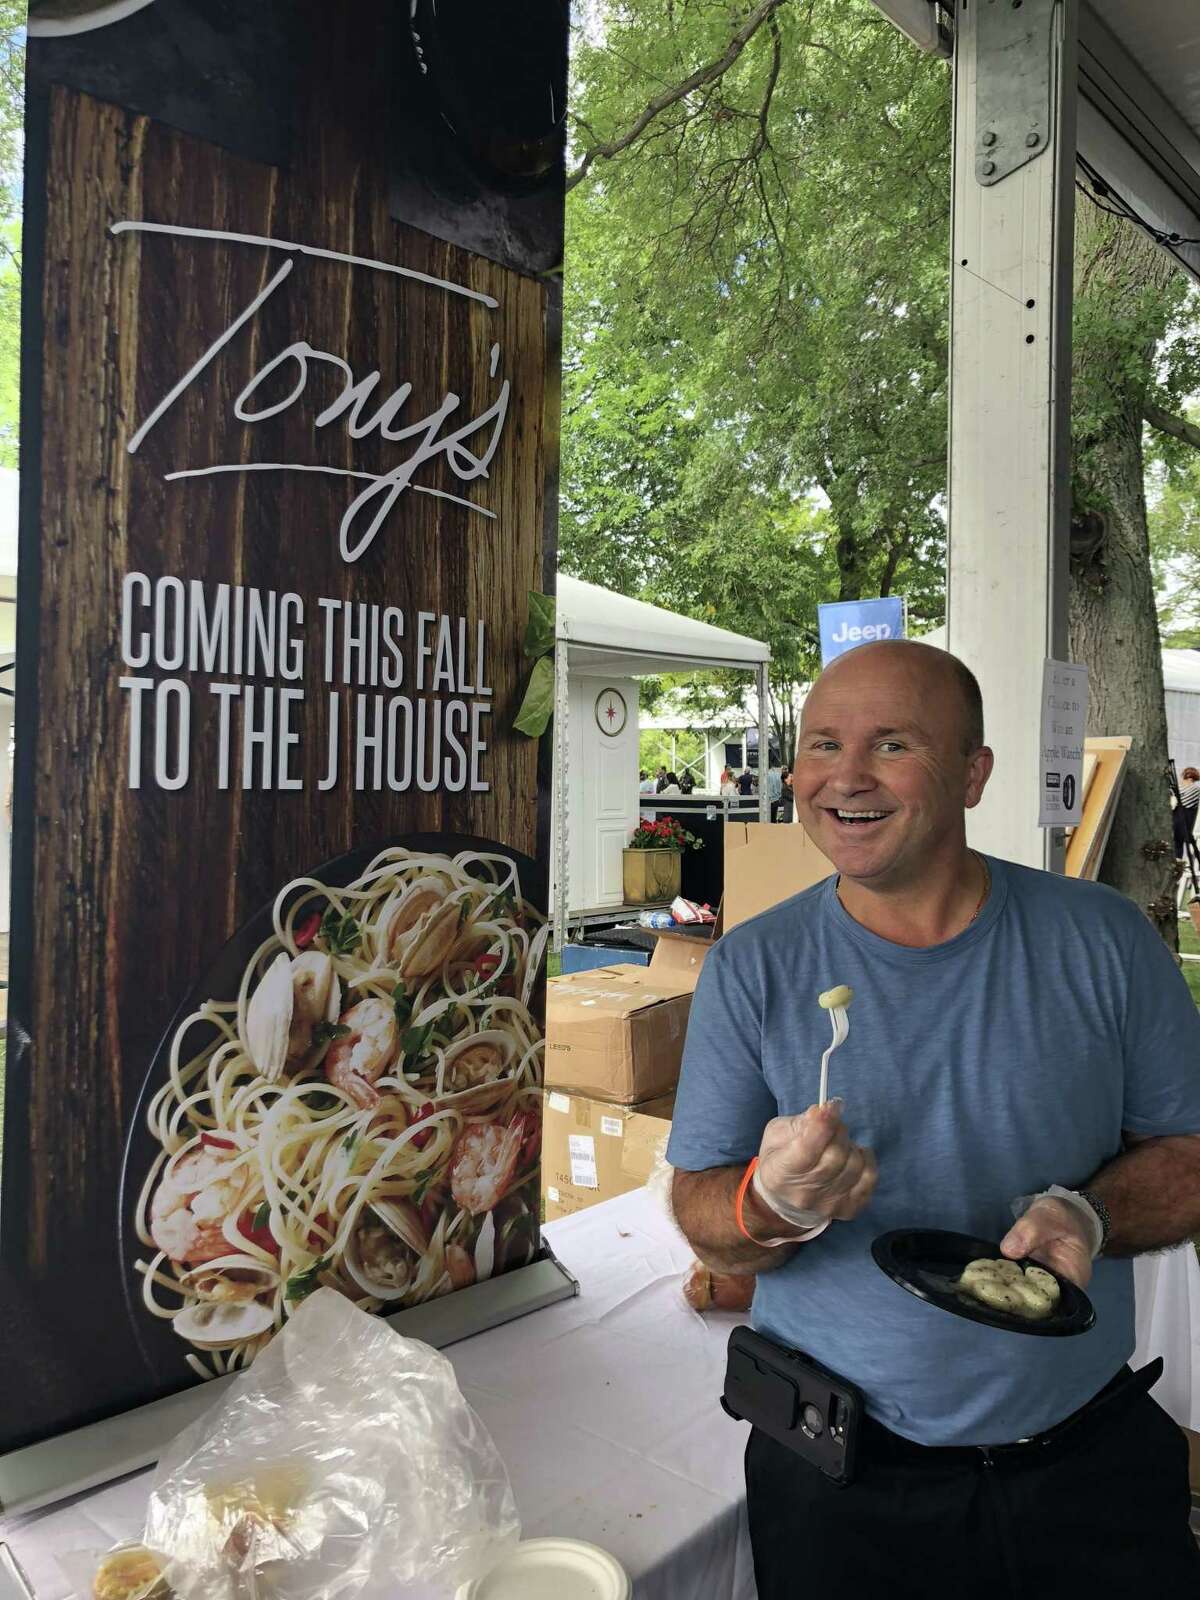 Tony Capasso of Tony's at the JHouse serving up some of his Italian specialties at the Greenwich Wine + Food Festival in September.